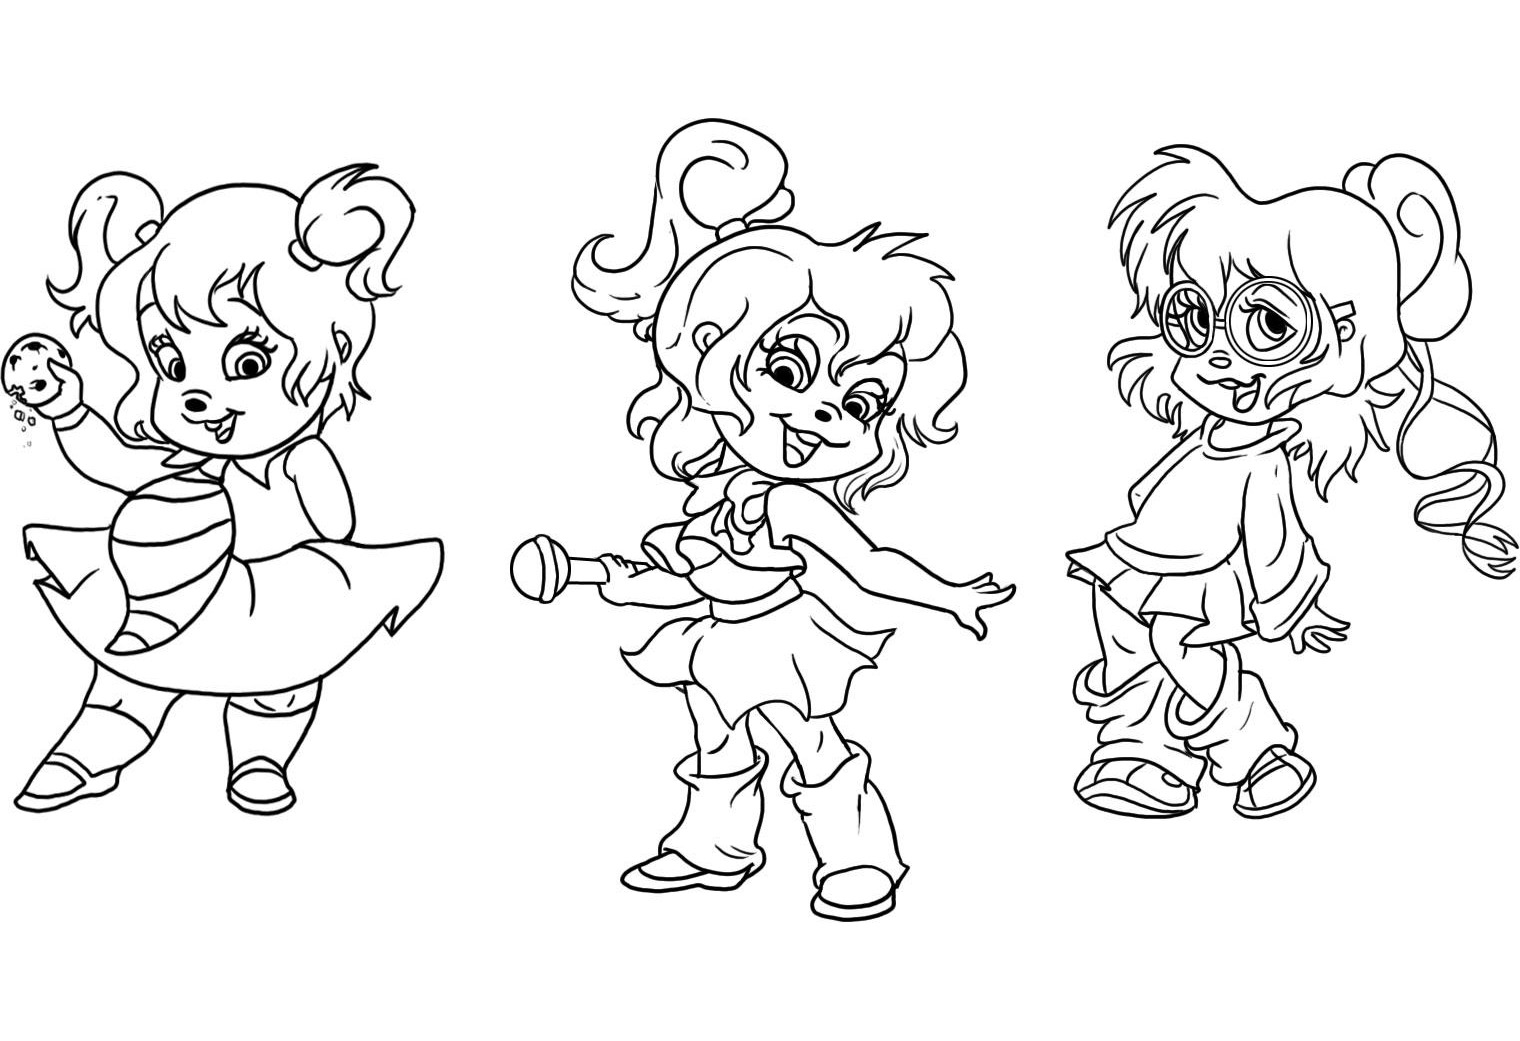 Coloring of the 3 Chipettes